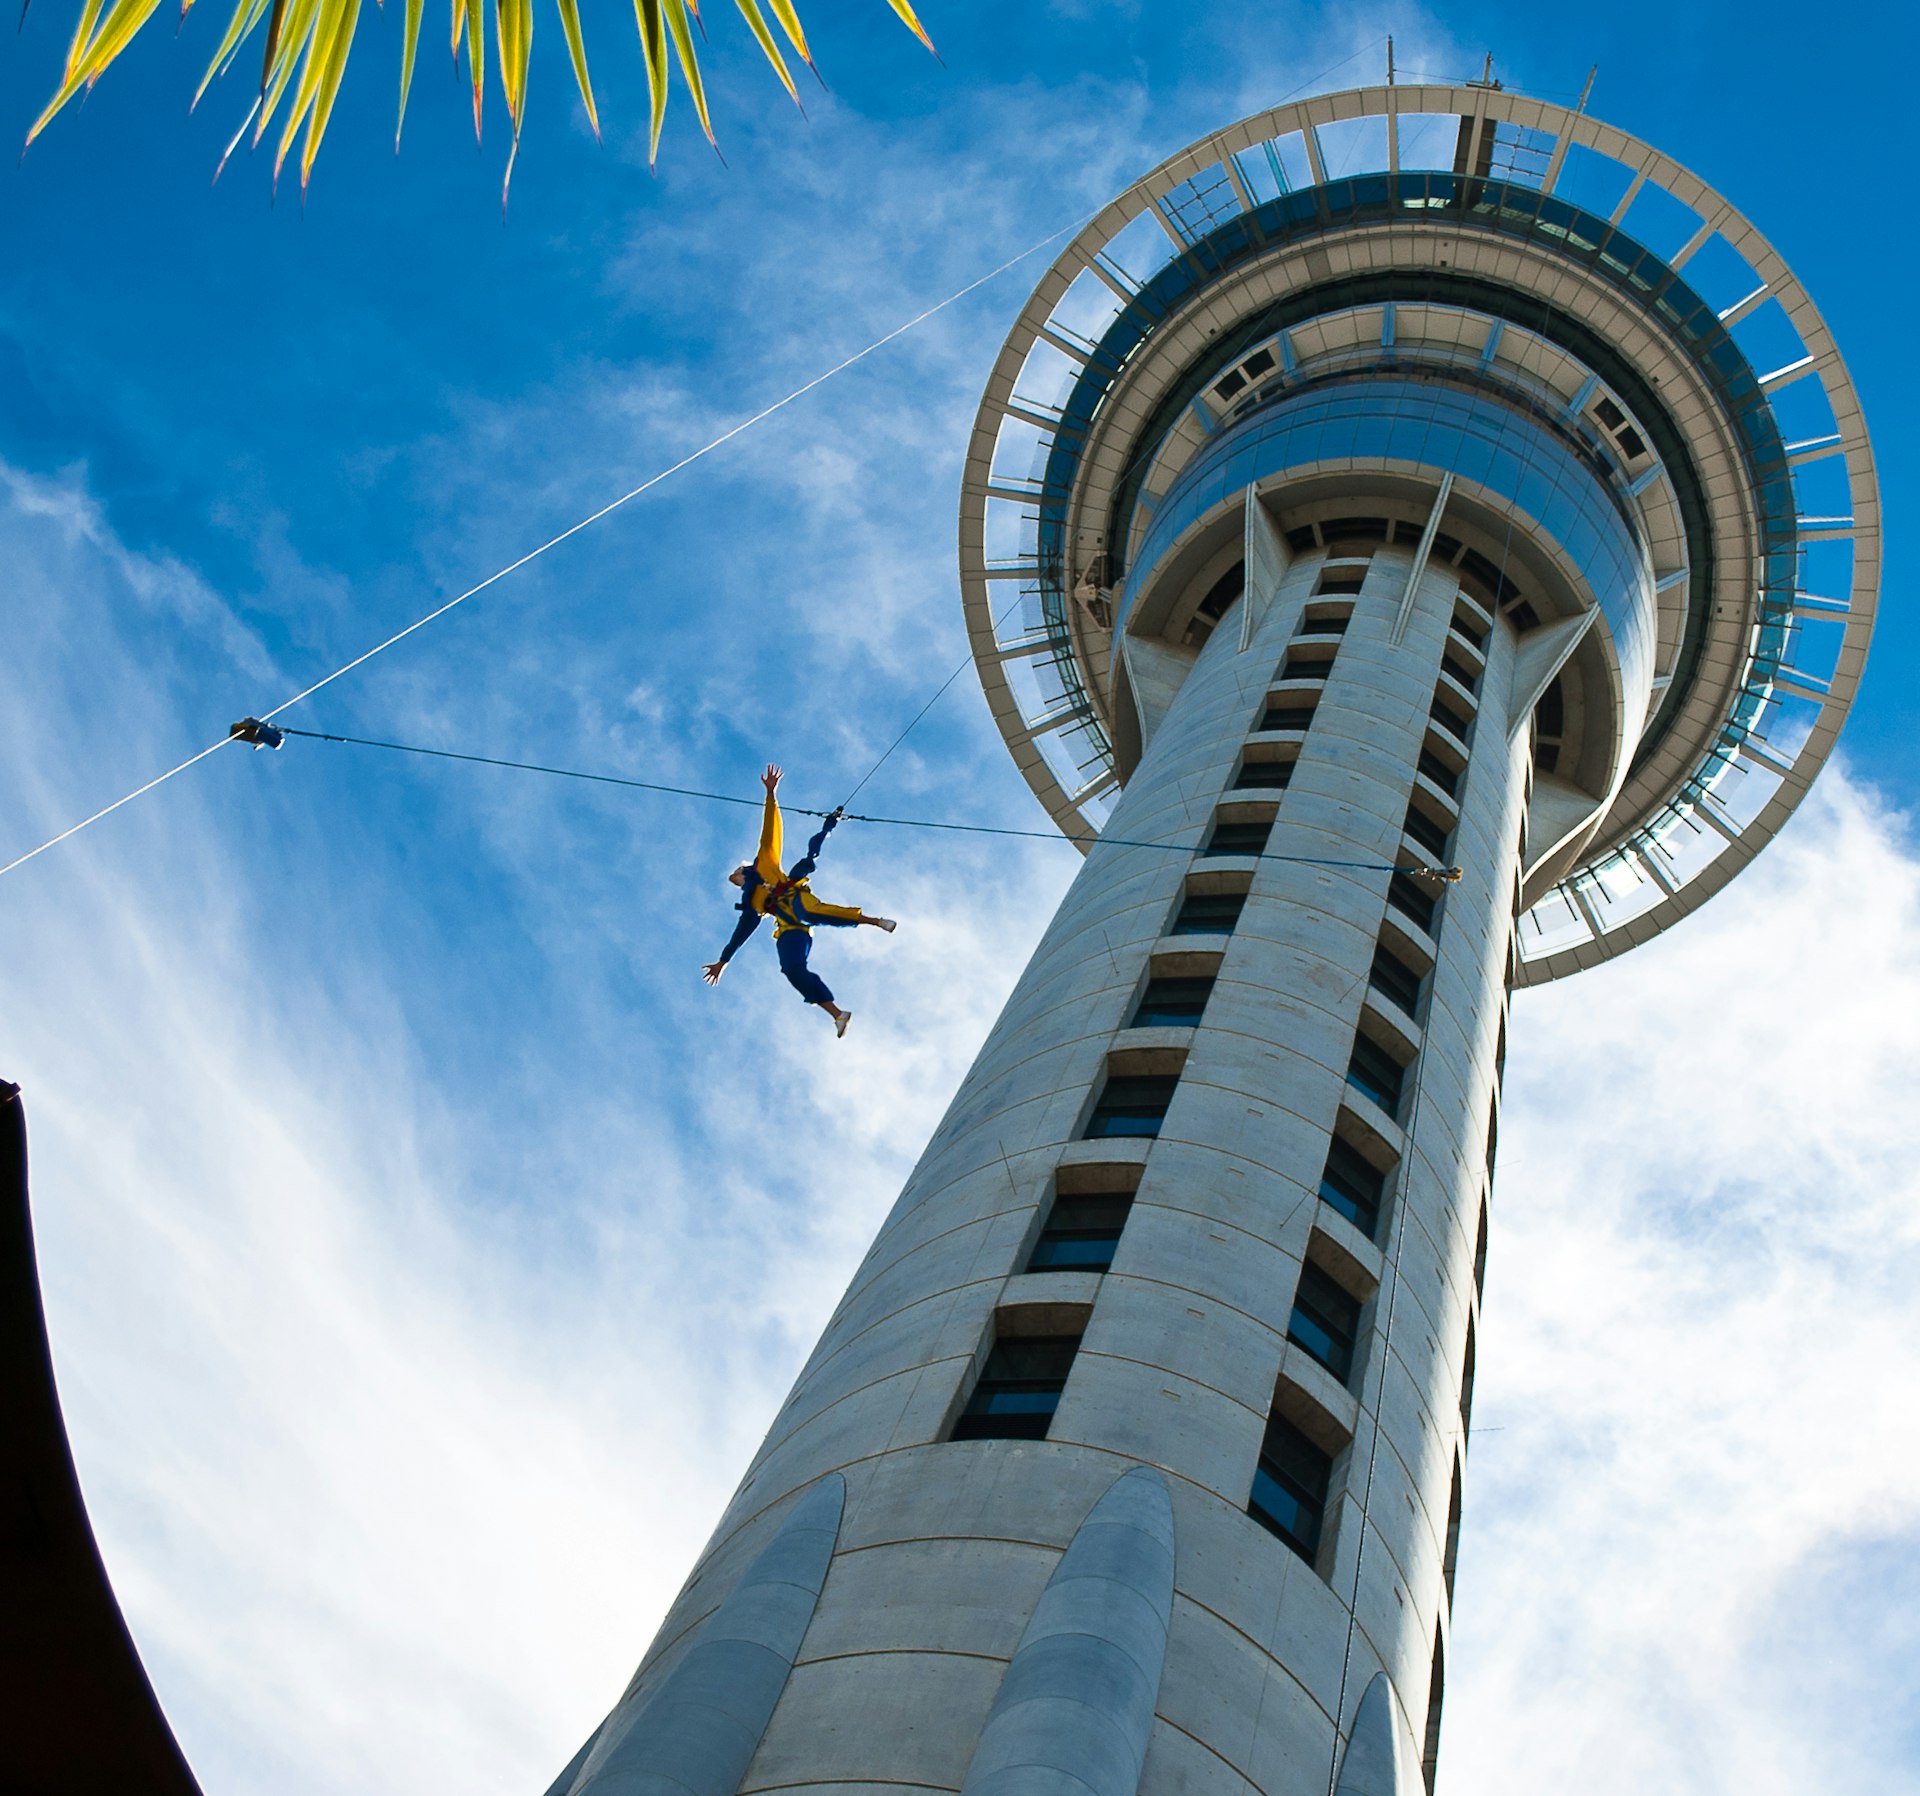 Auckland Sky Tower seen from below against a blue sky, with someone jumping off